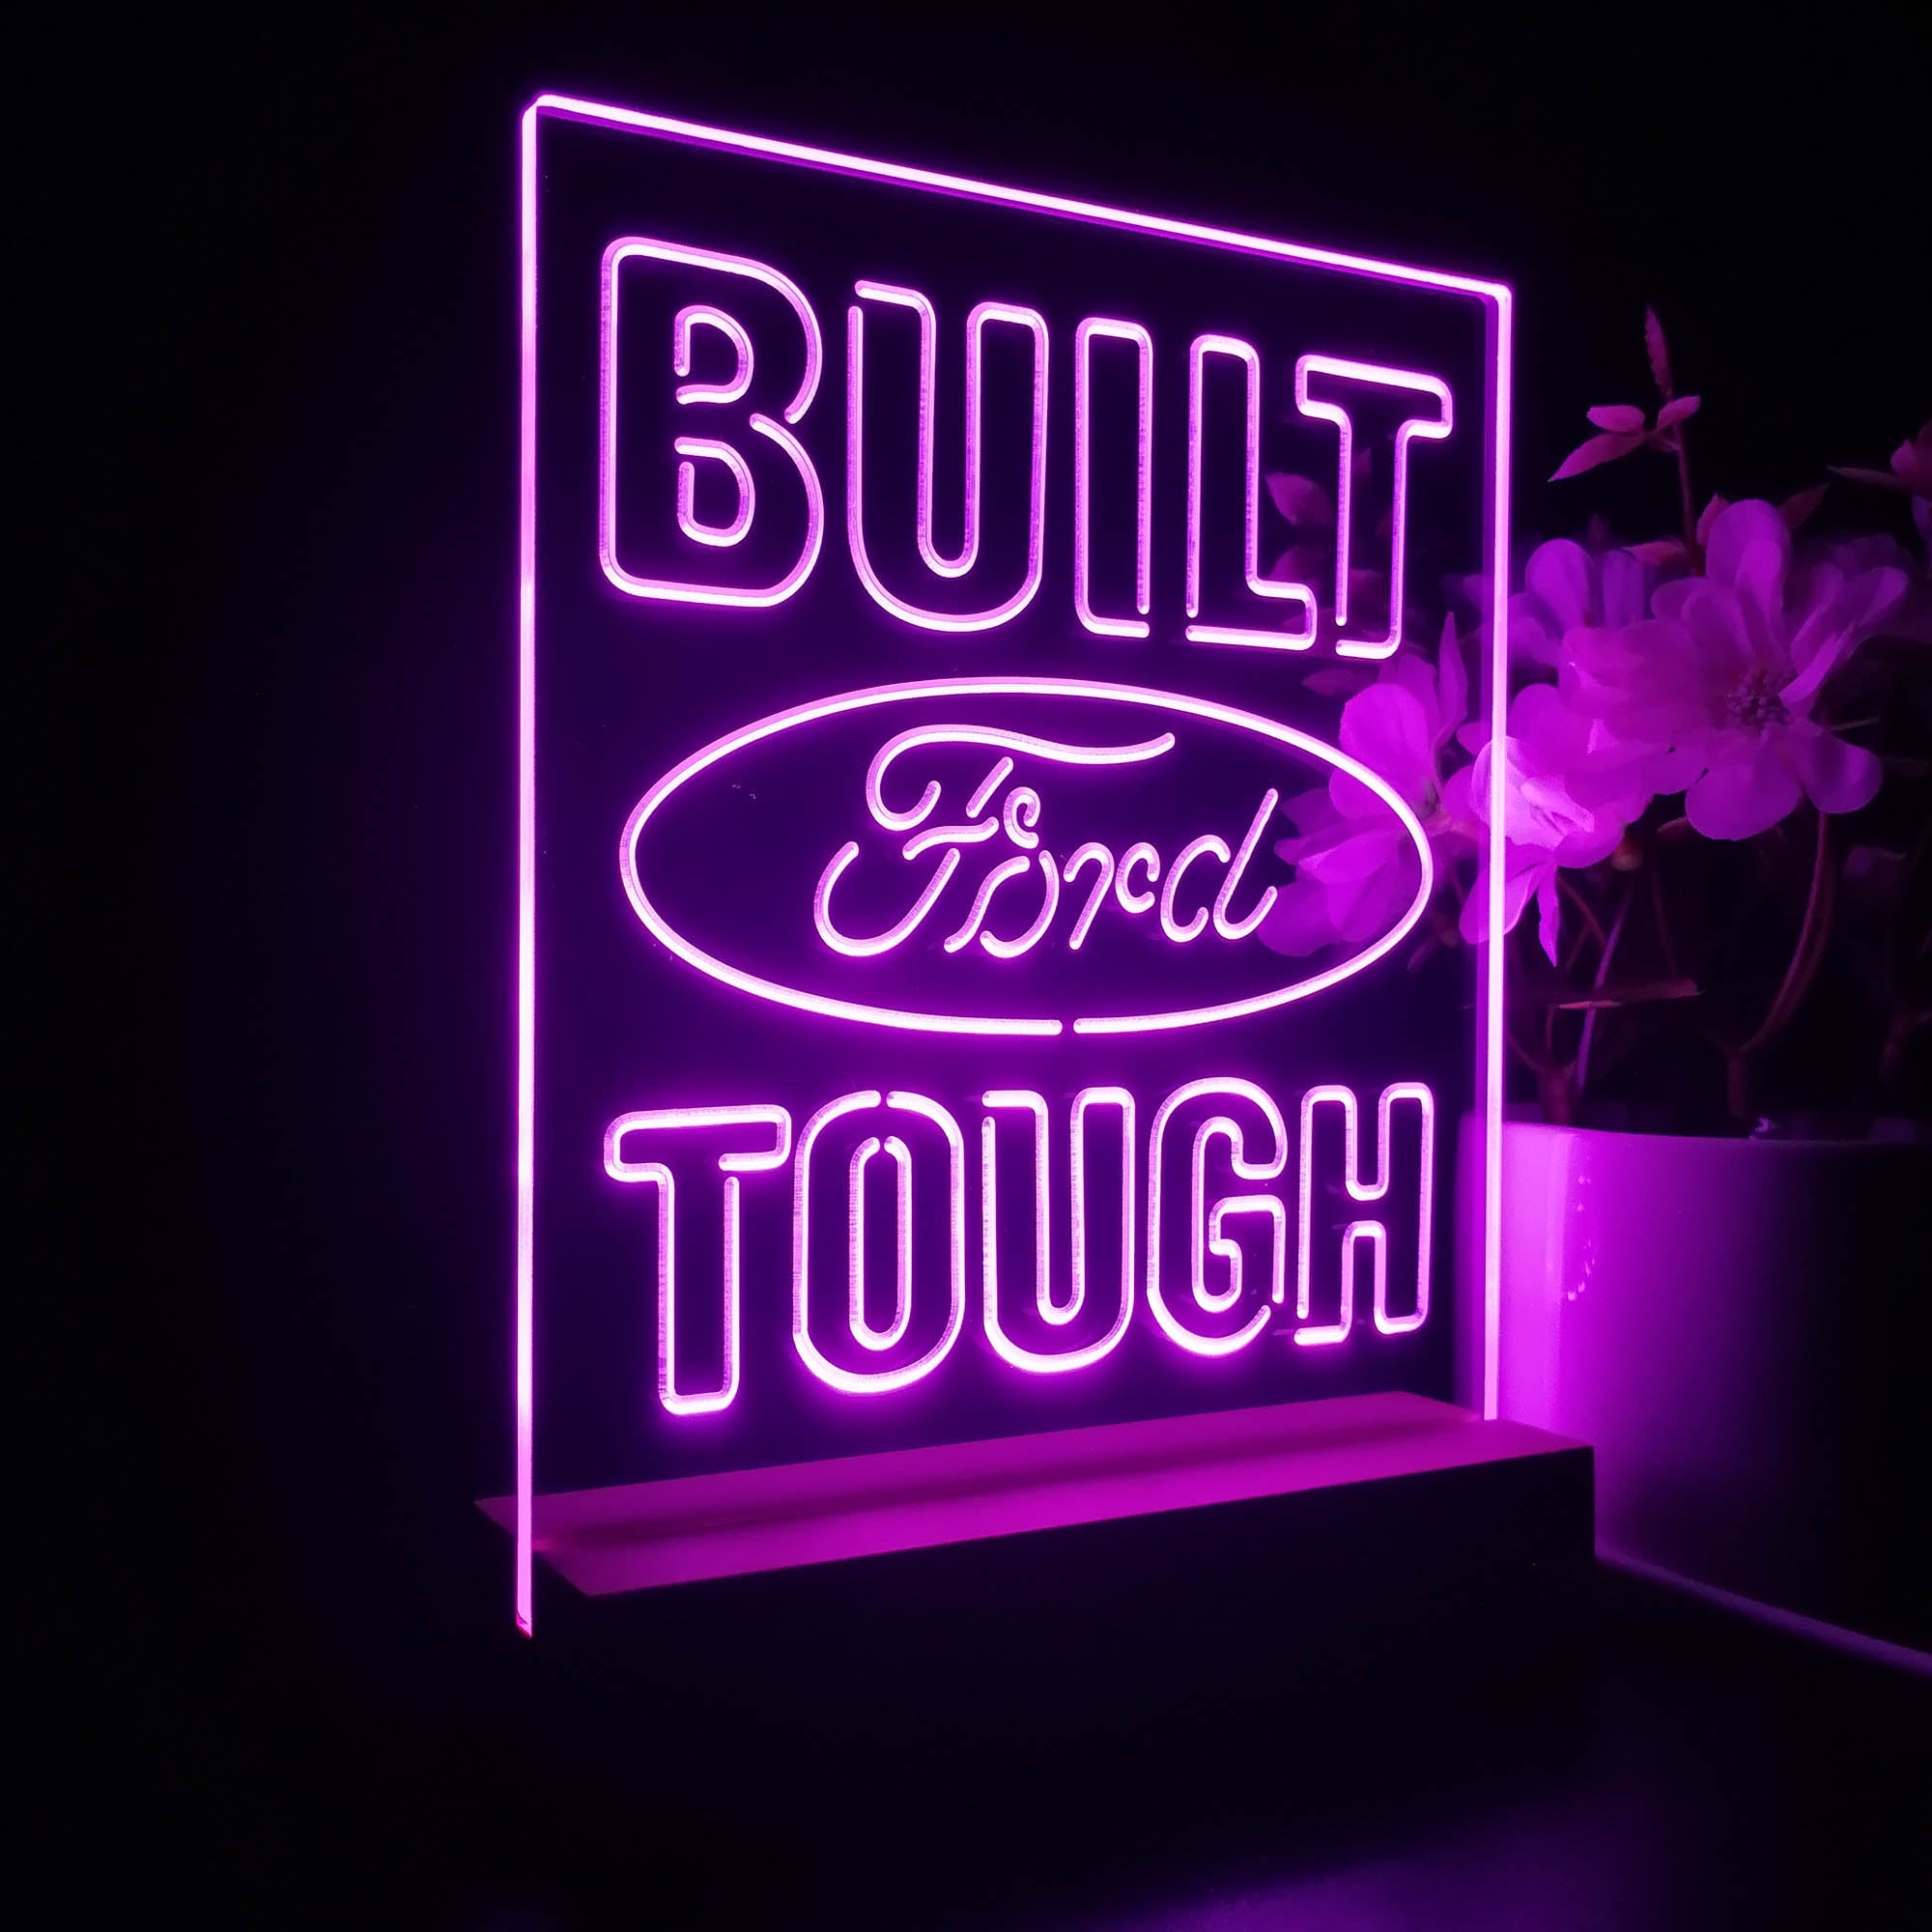 Built Touch Ford 3D Illusion Night Light Desk Lamp